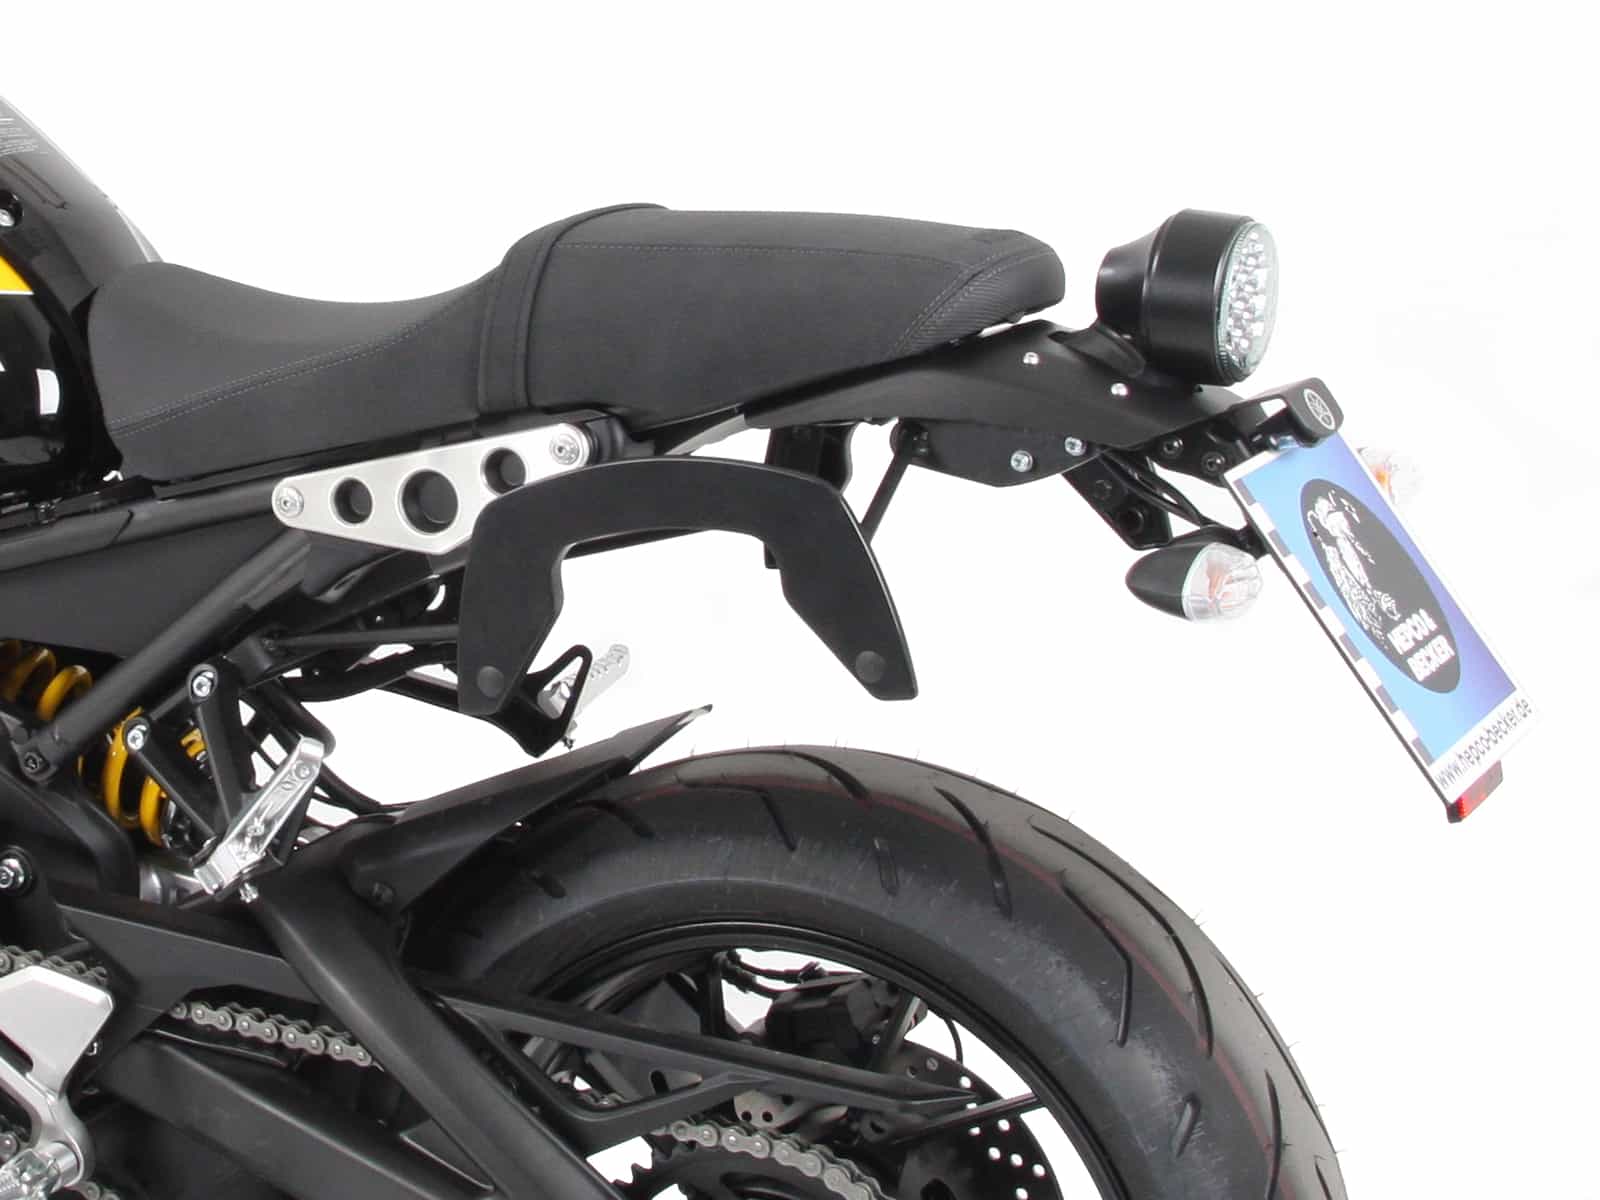 C-Bow modification for short tail for Yamaha XSR 900 (2016-2021)